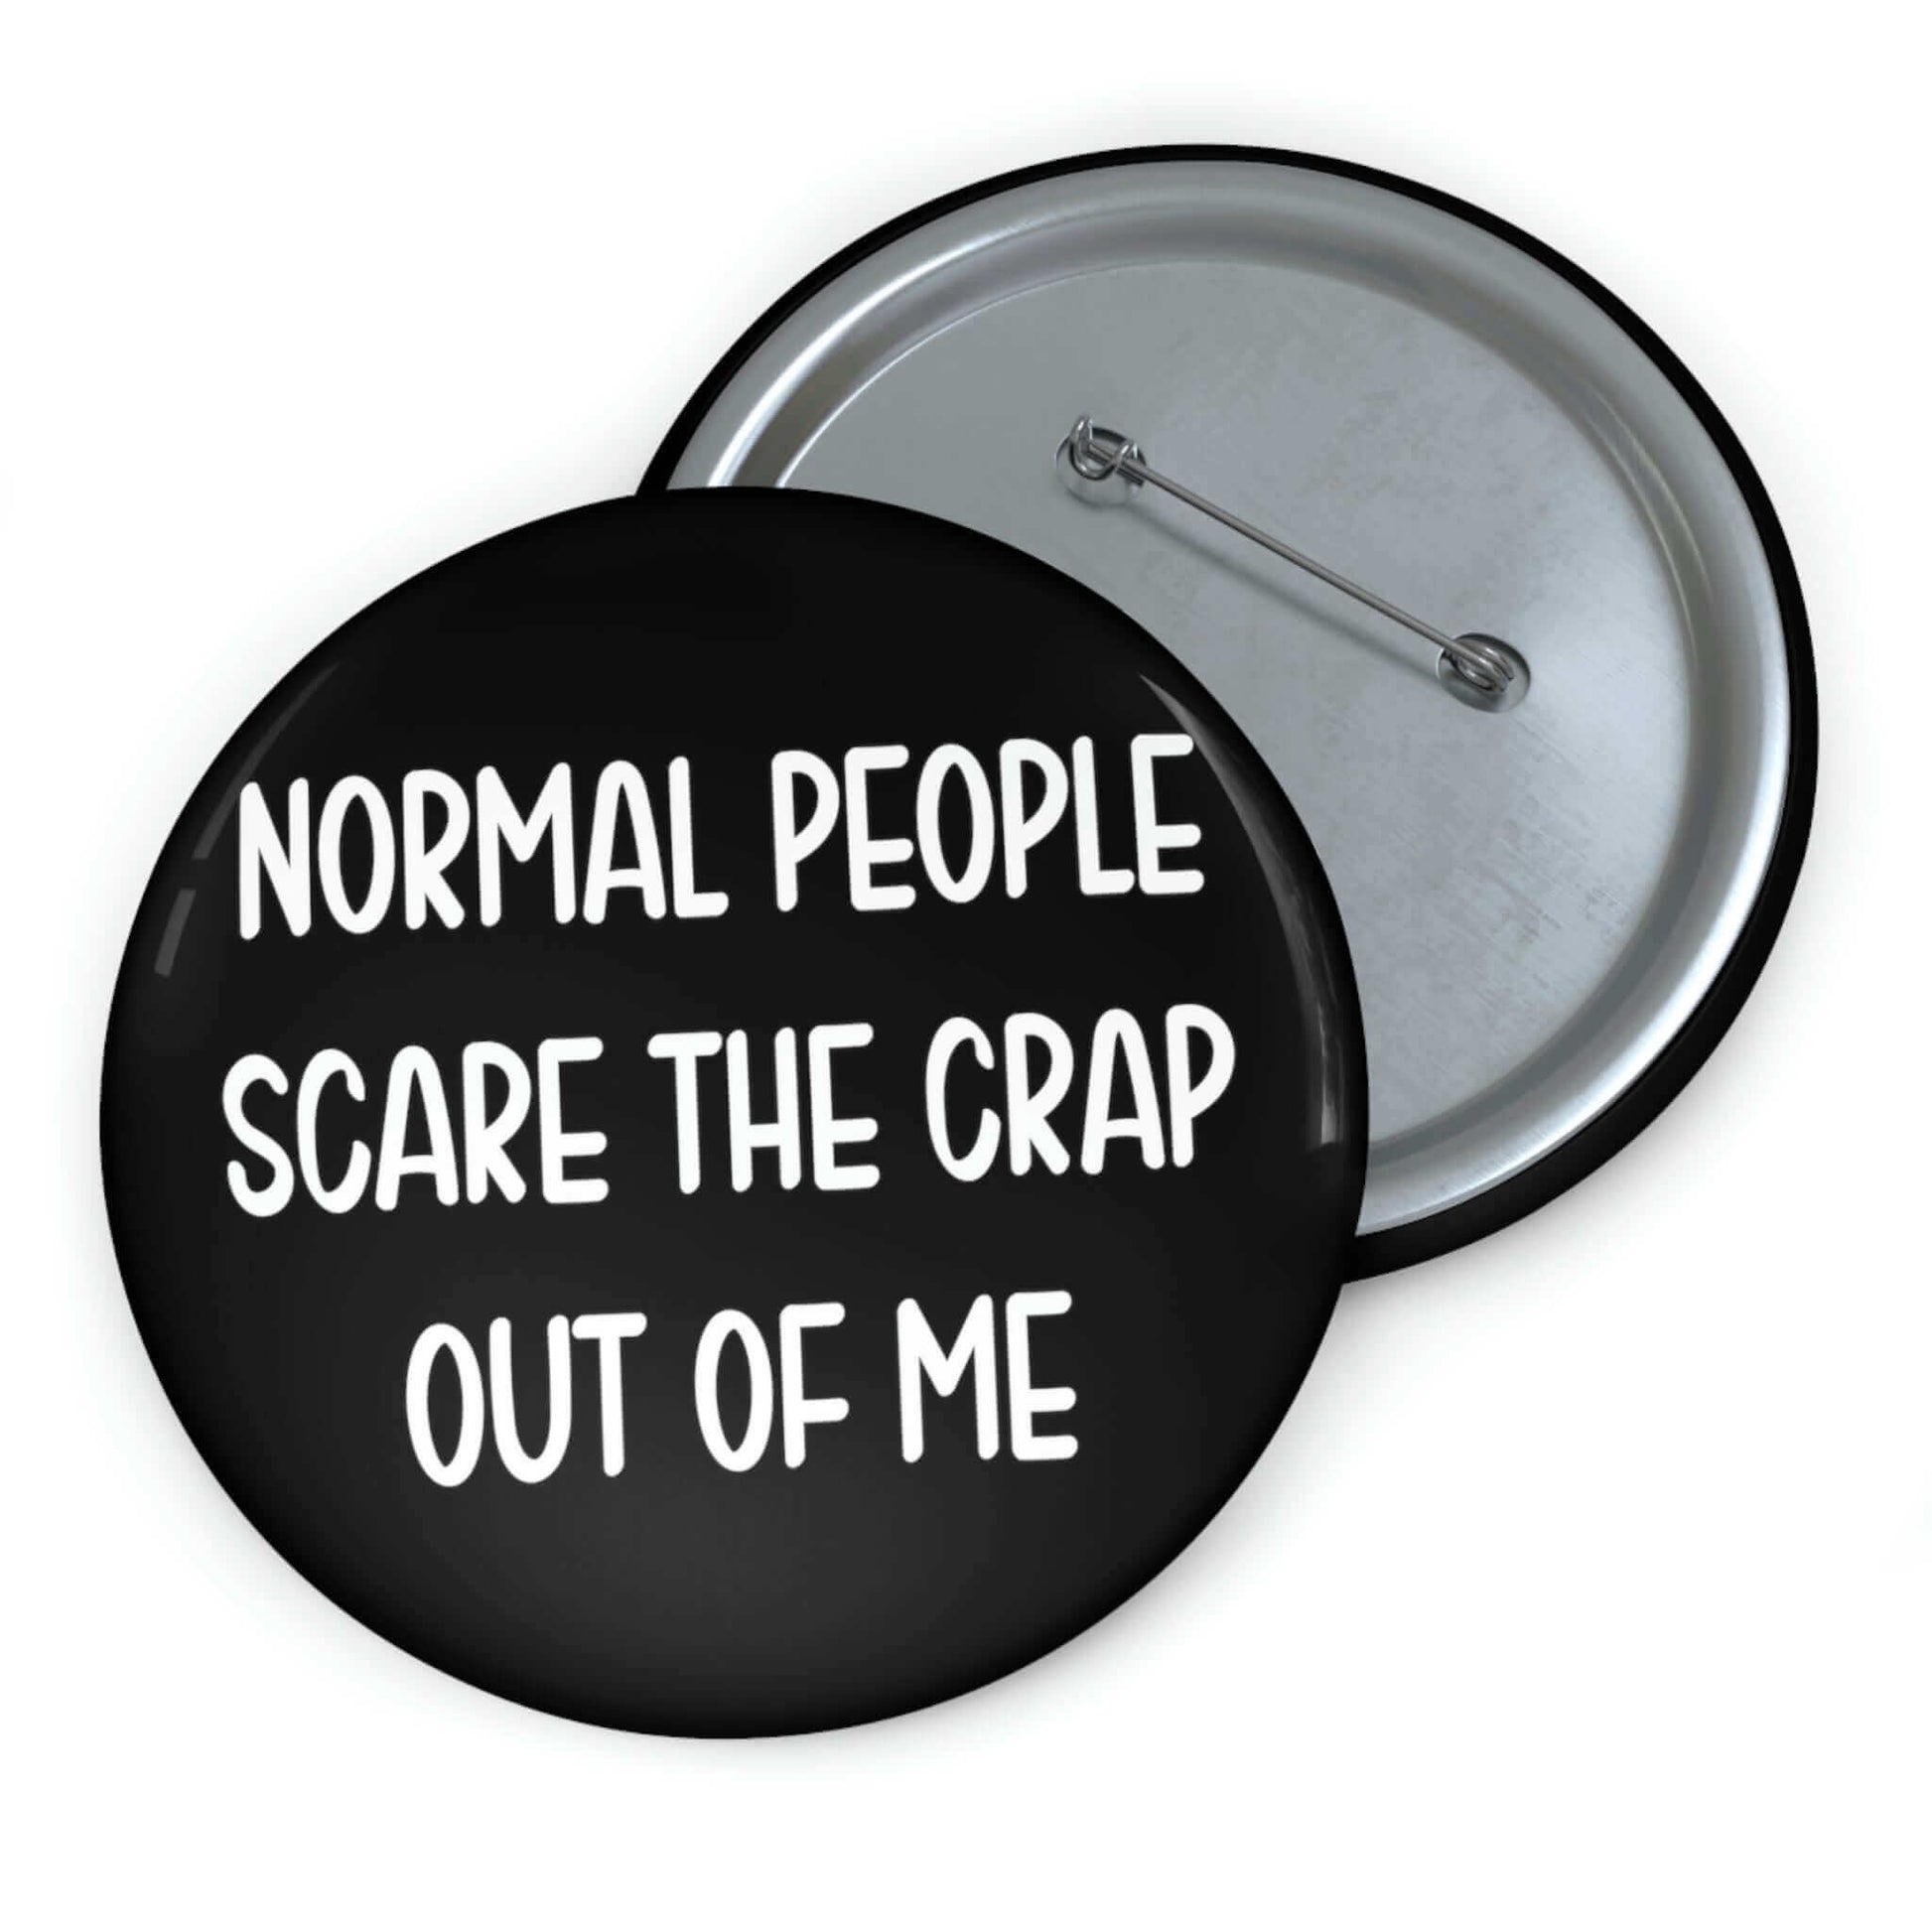 Pin-back button that says Normal people scare the crap out of me.